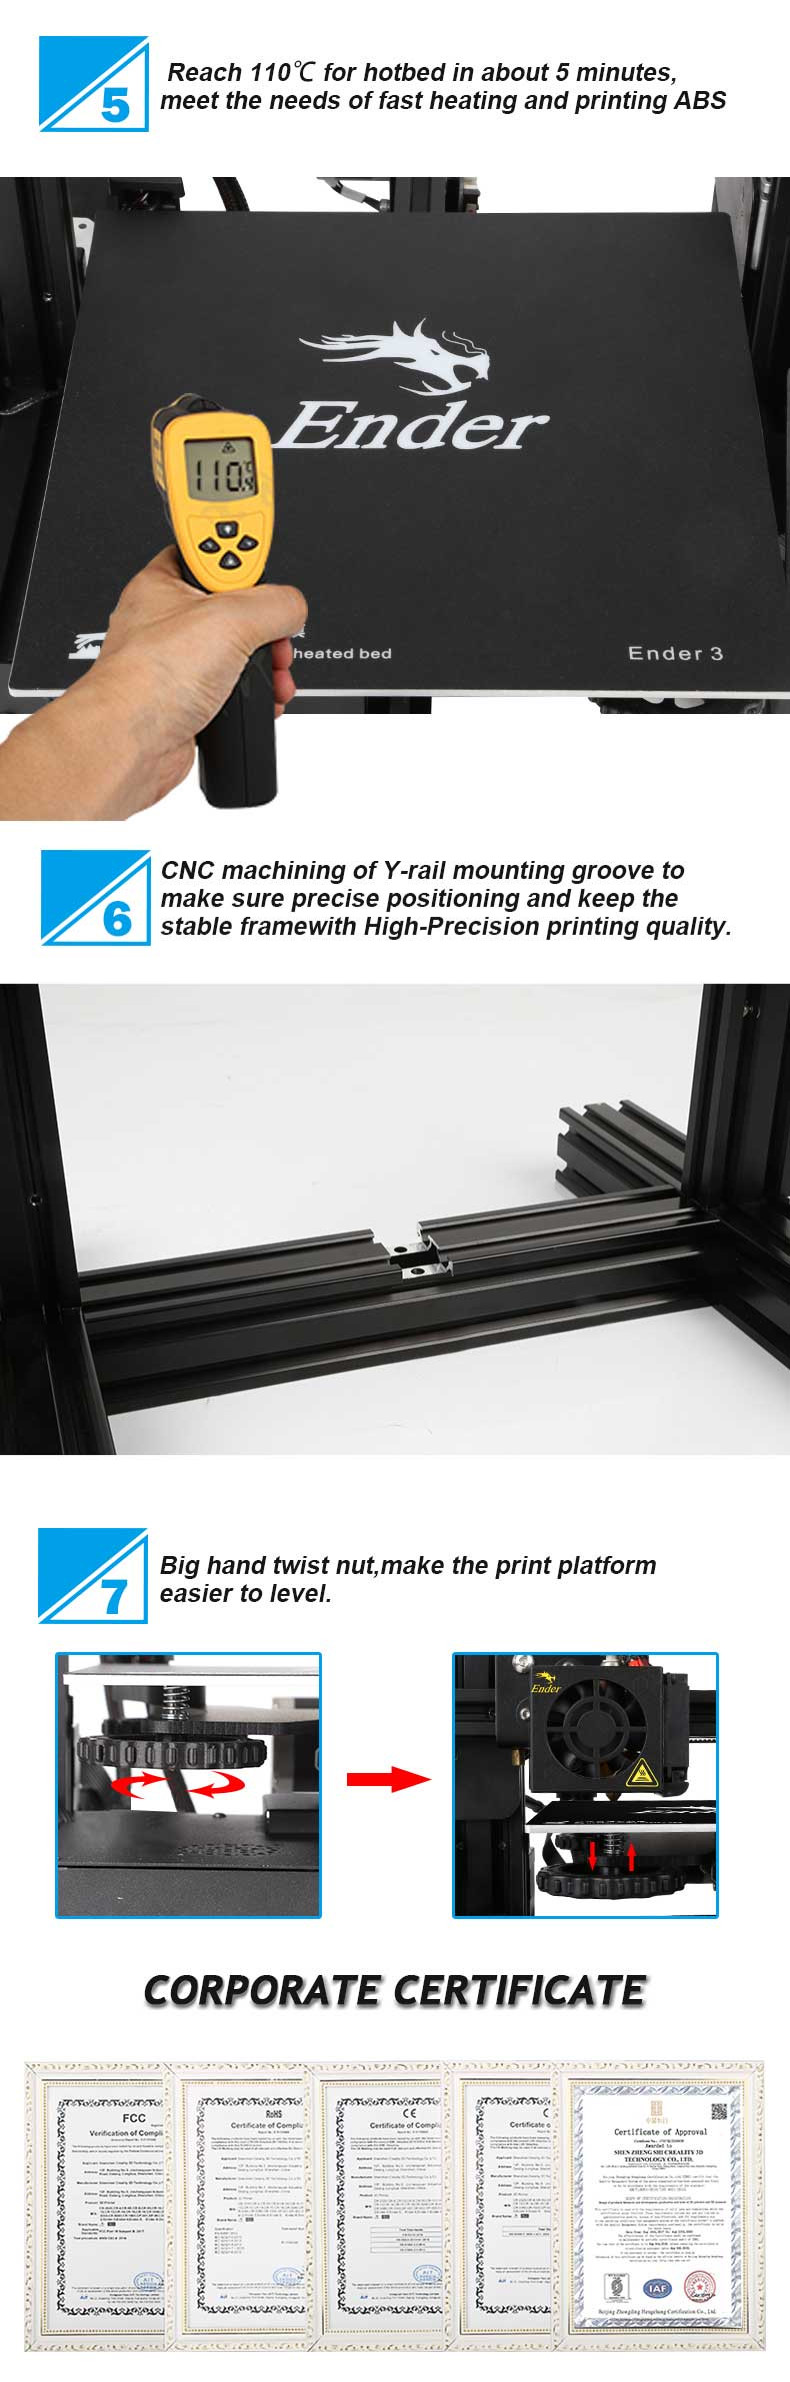 Creality 3D® Ender-3 V-slot Prusa I3 DIY 3D Printer Kit 220x220x250mm Printing Size With Power Resume Function/MK10 Extruder 1.75mm 0.4mm Nozzle 58